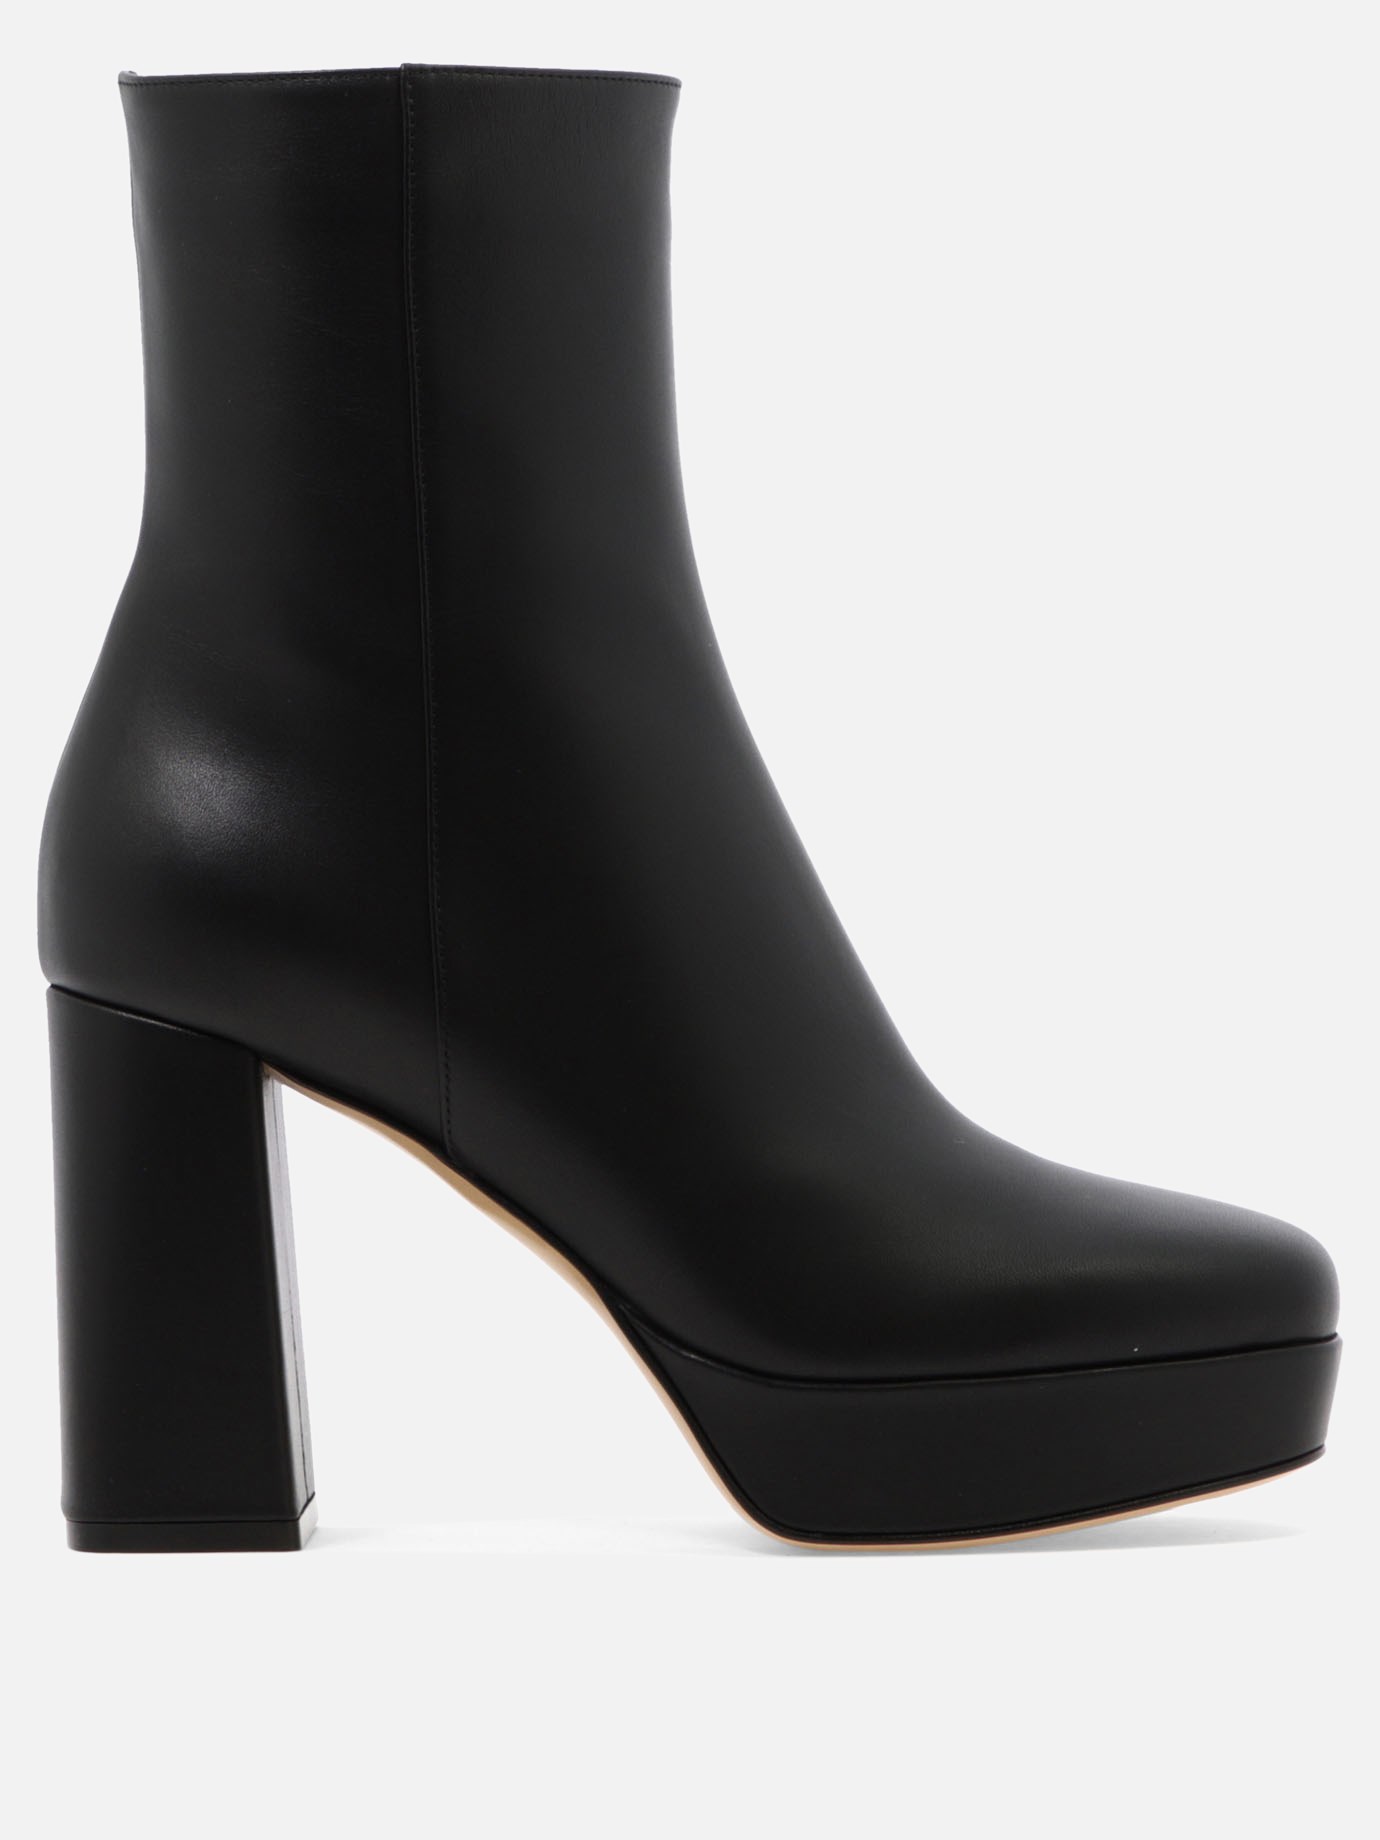  Daisen  ankle bootsby Gianvito Rossi - 1